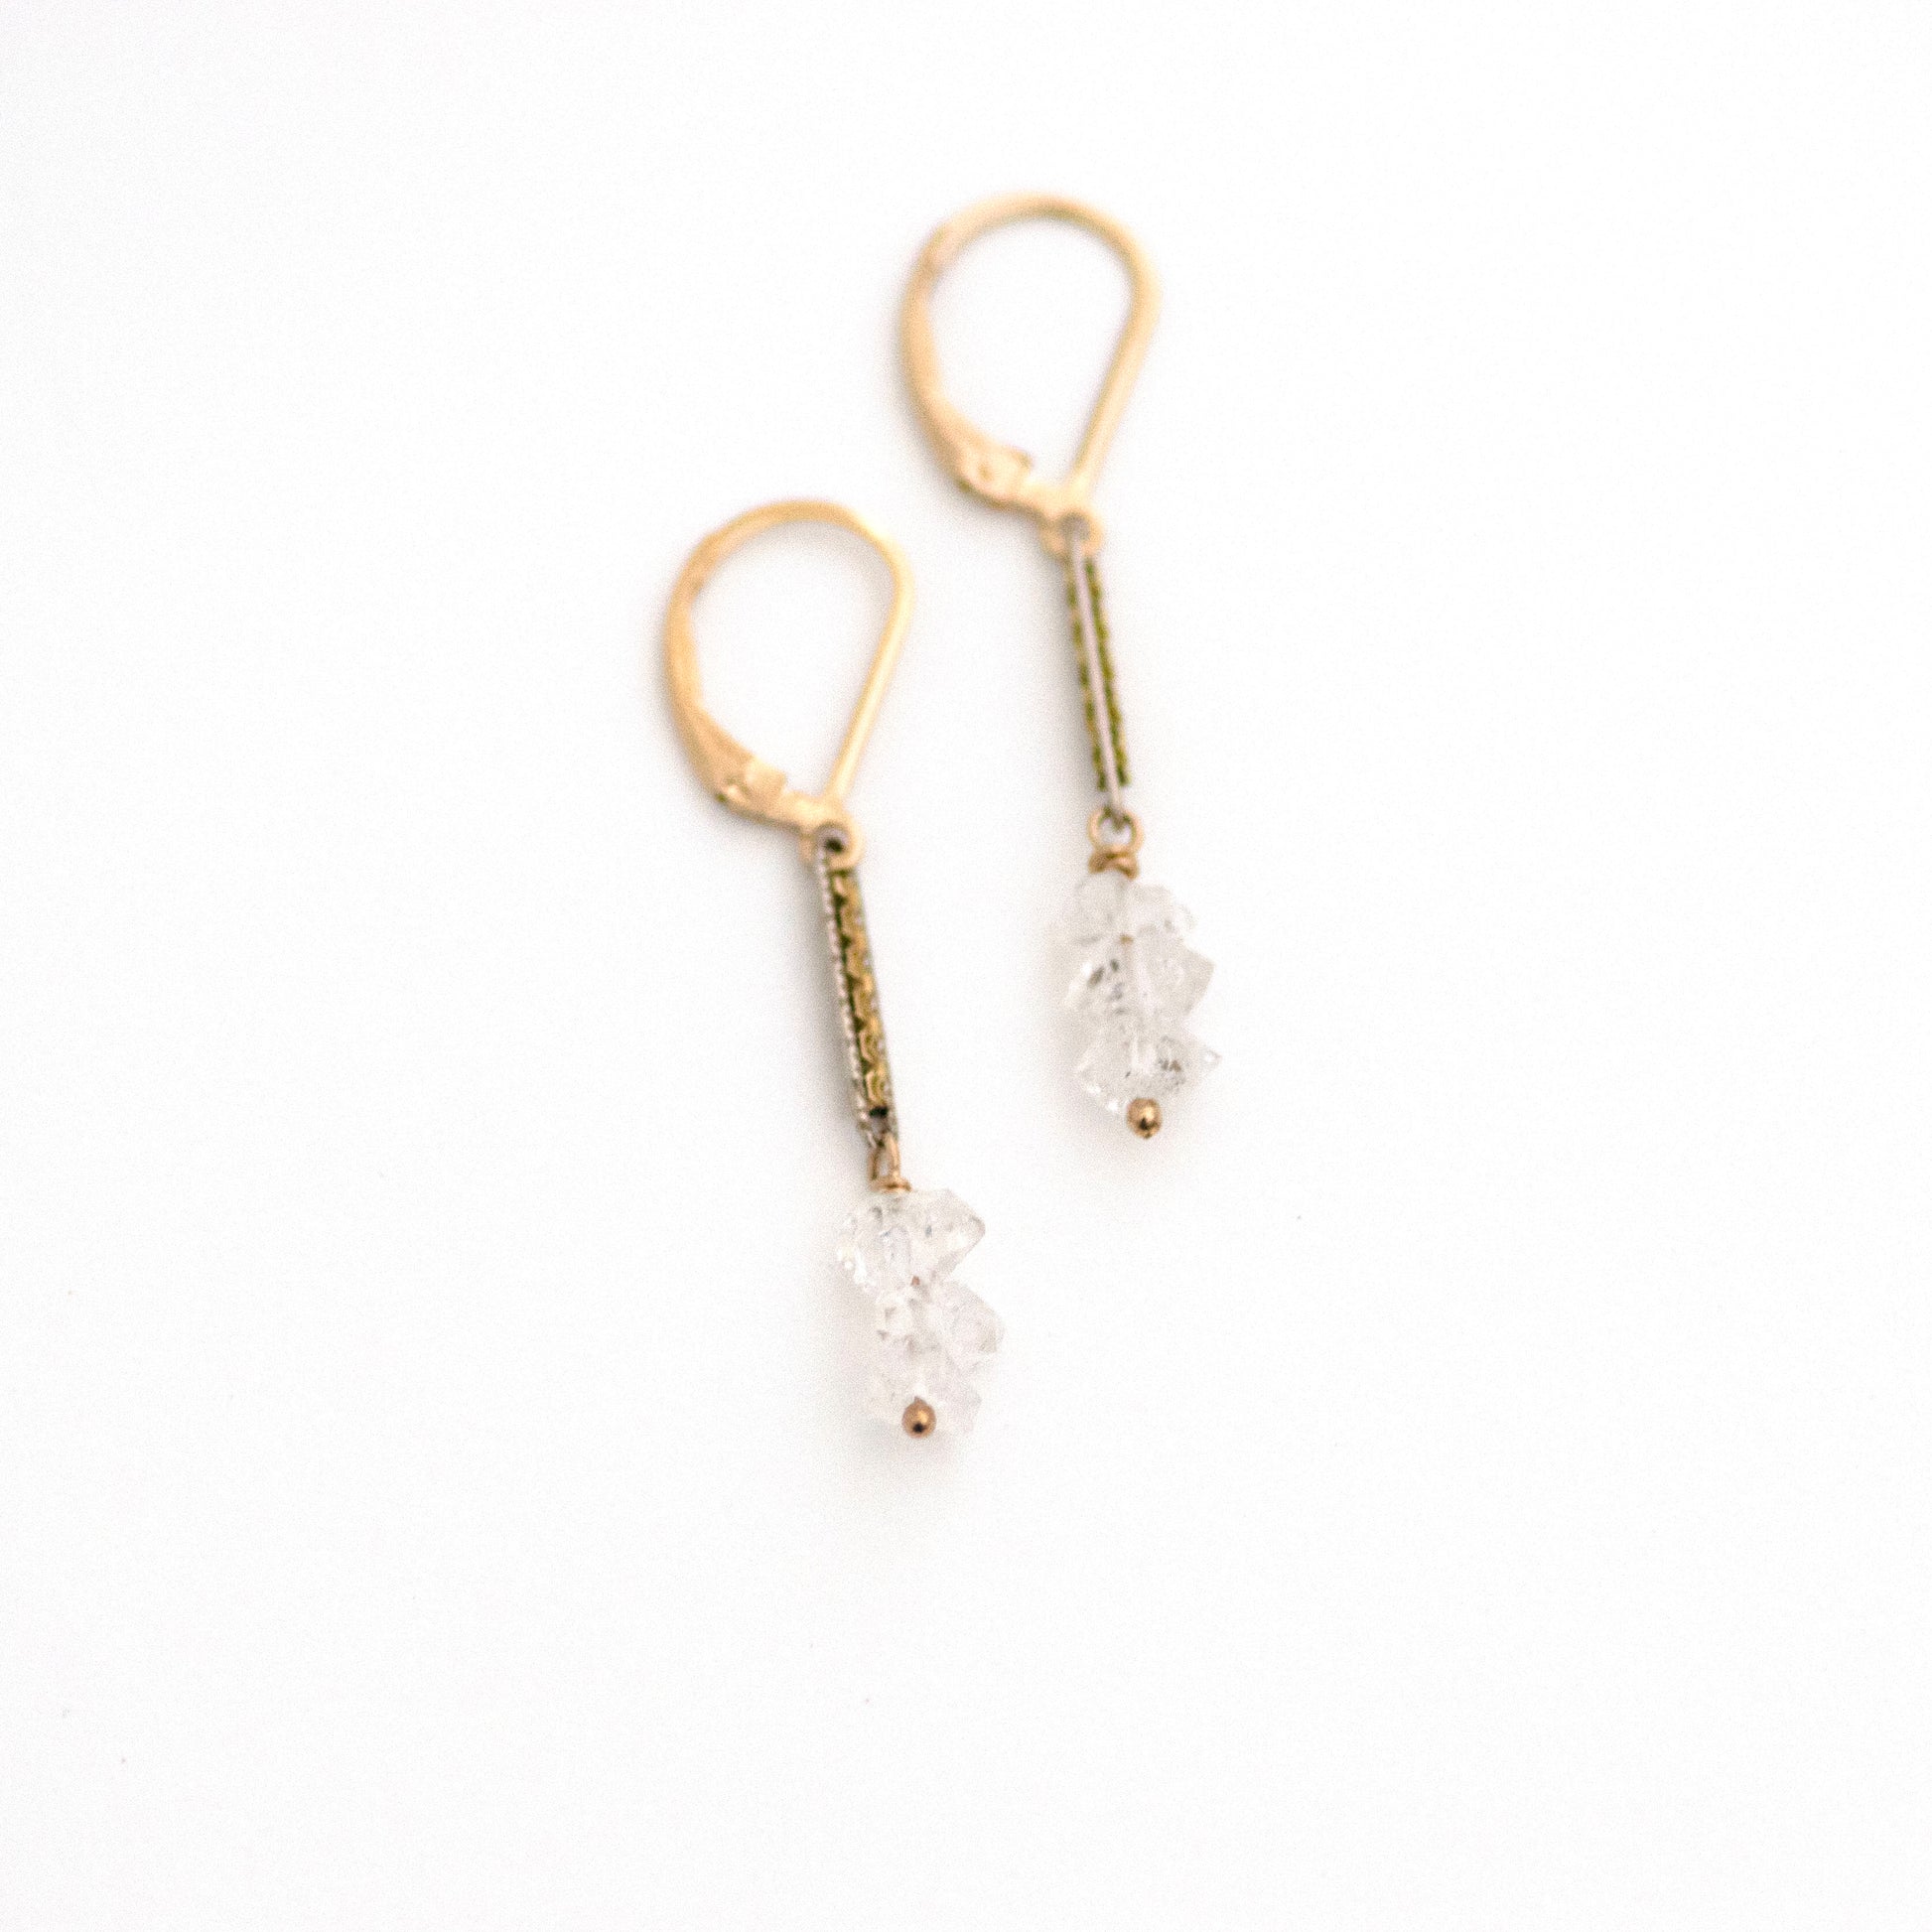 Antique Watch Chain and Herkimer Diamond Earrings